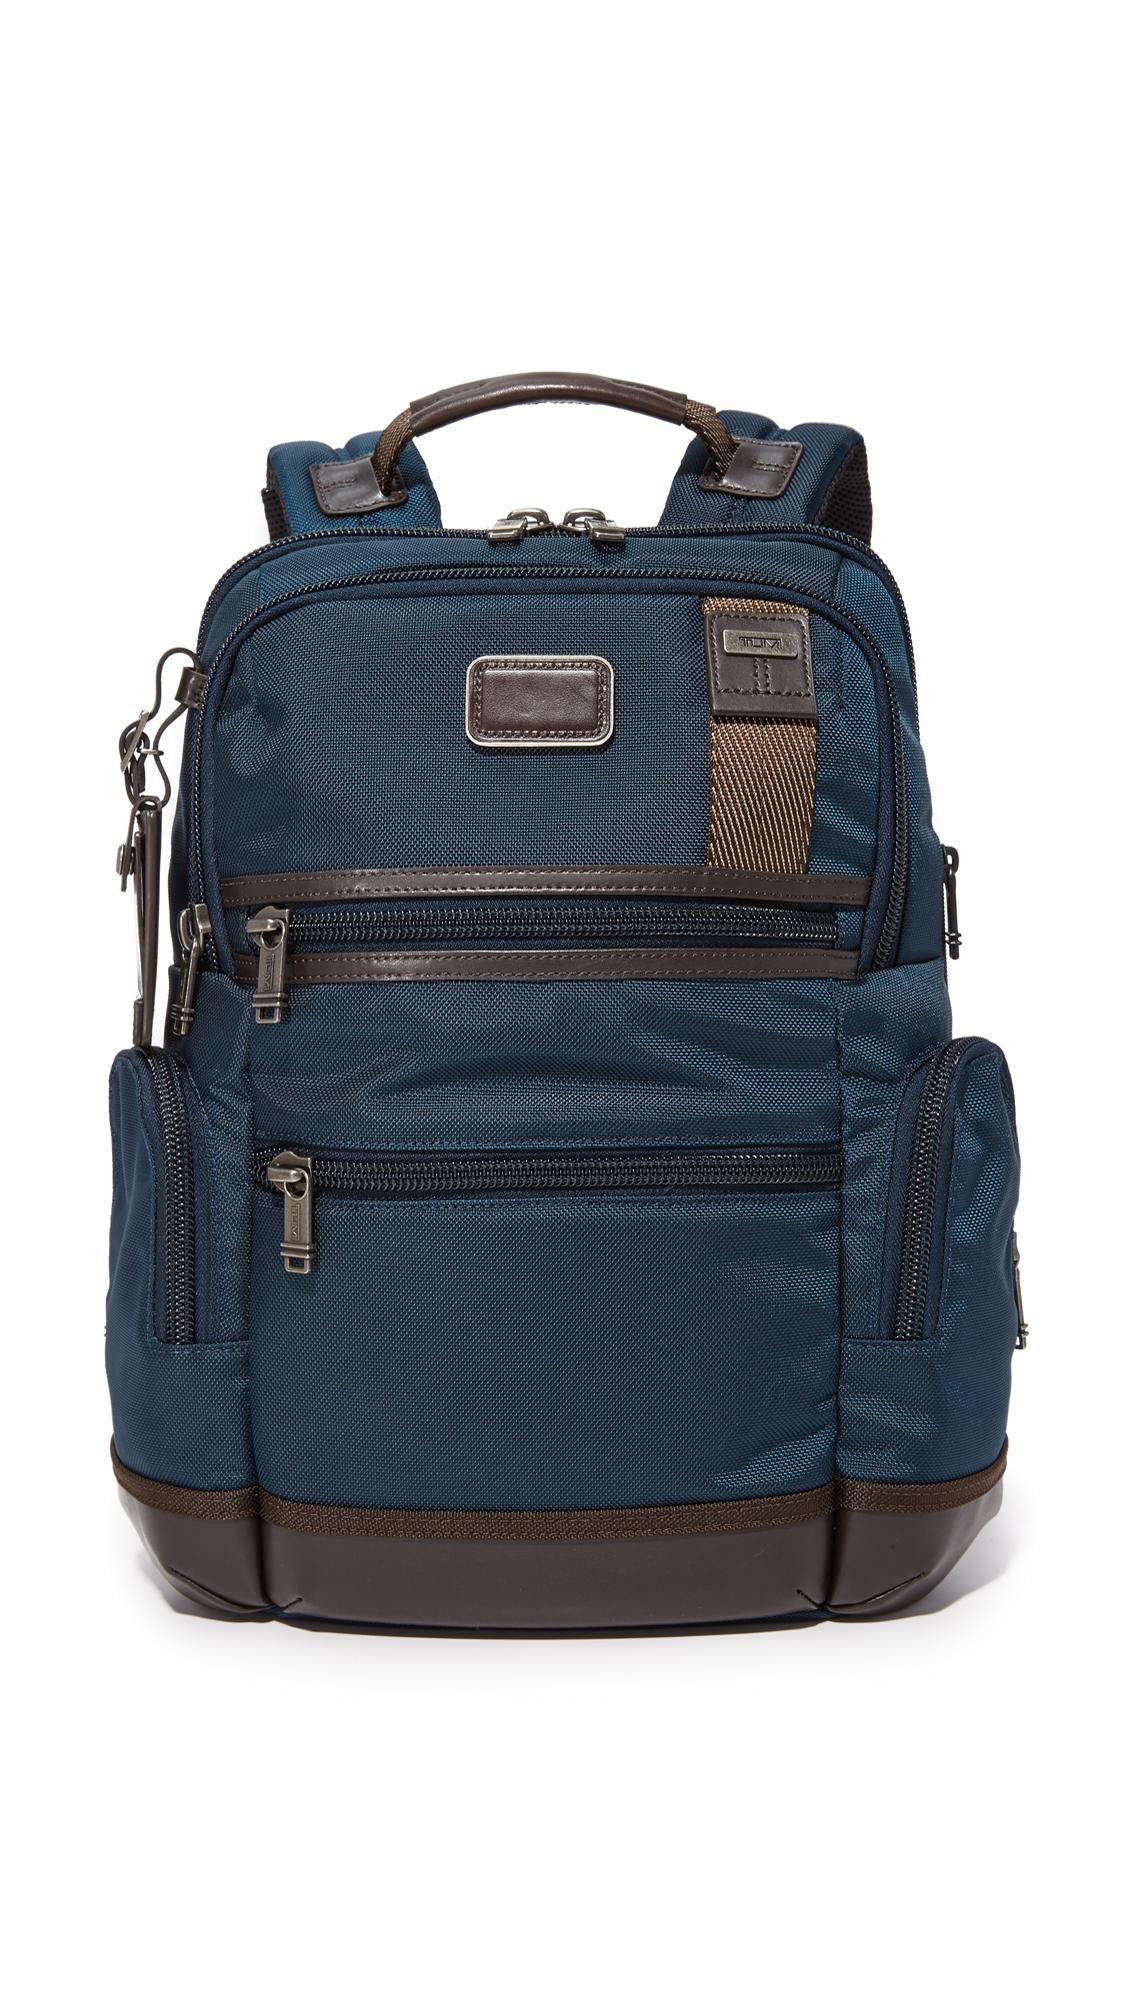 Tumi Leather Alpha Bravo Knox Backpack in Navy (Blue) for Men - Lyst